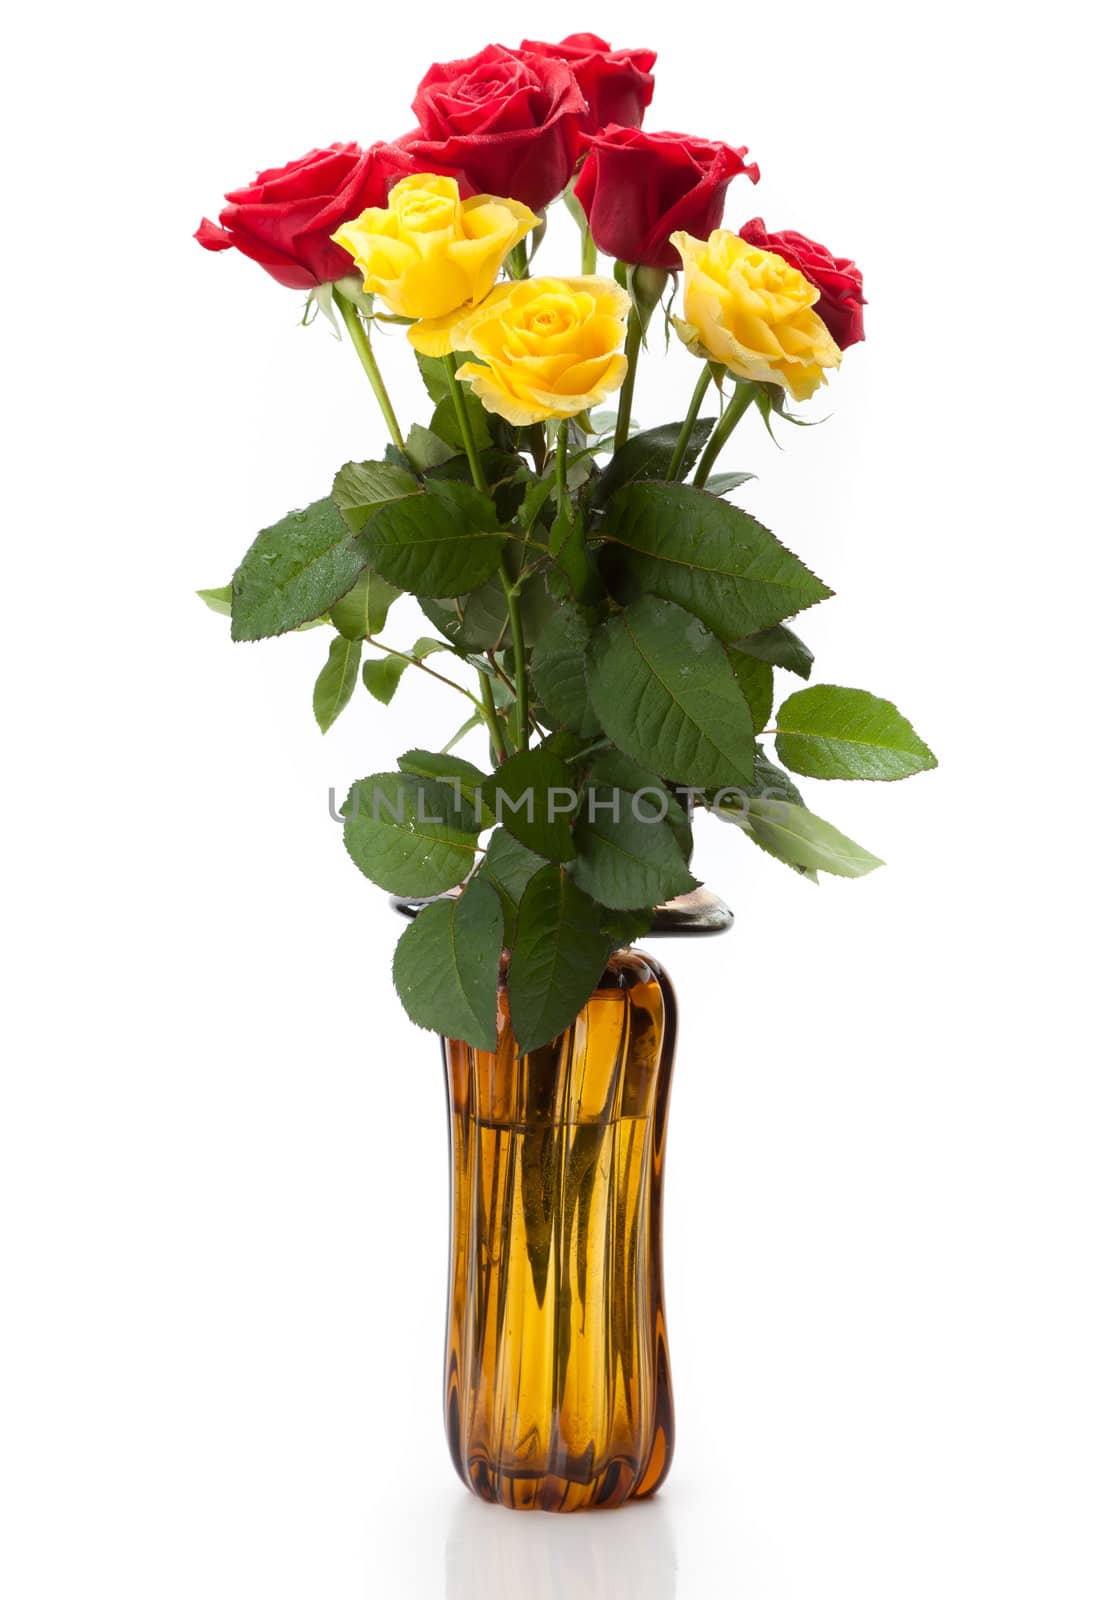 A bouquet of red and yellow roses by Antartis